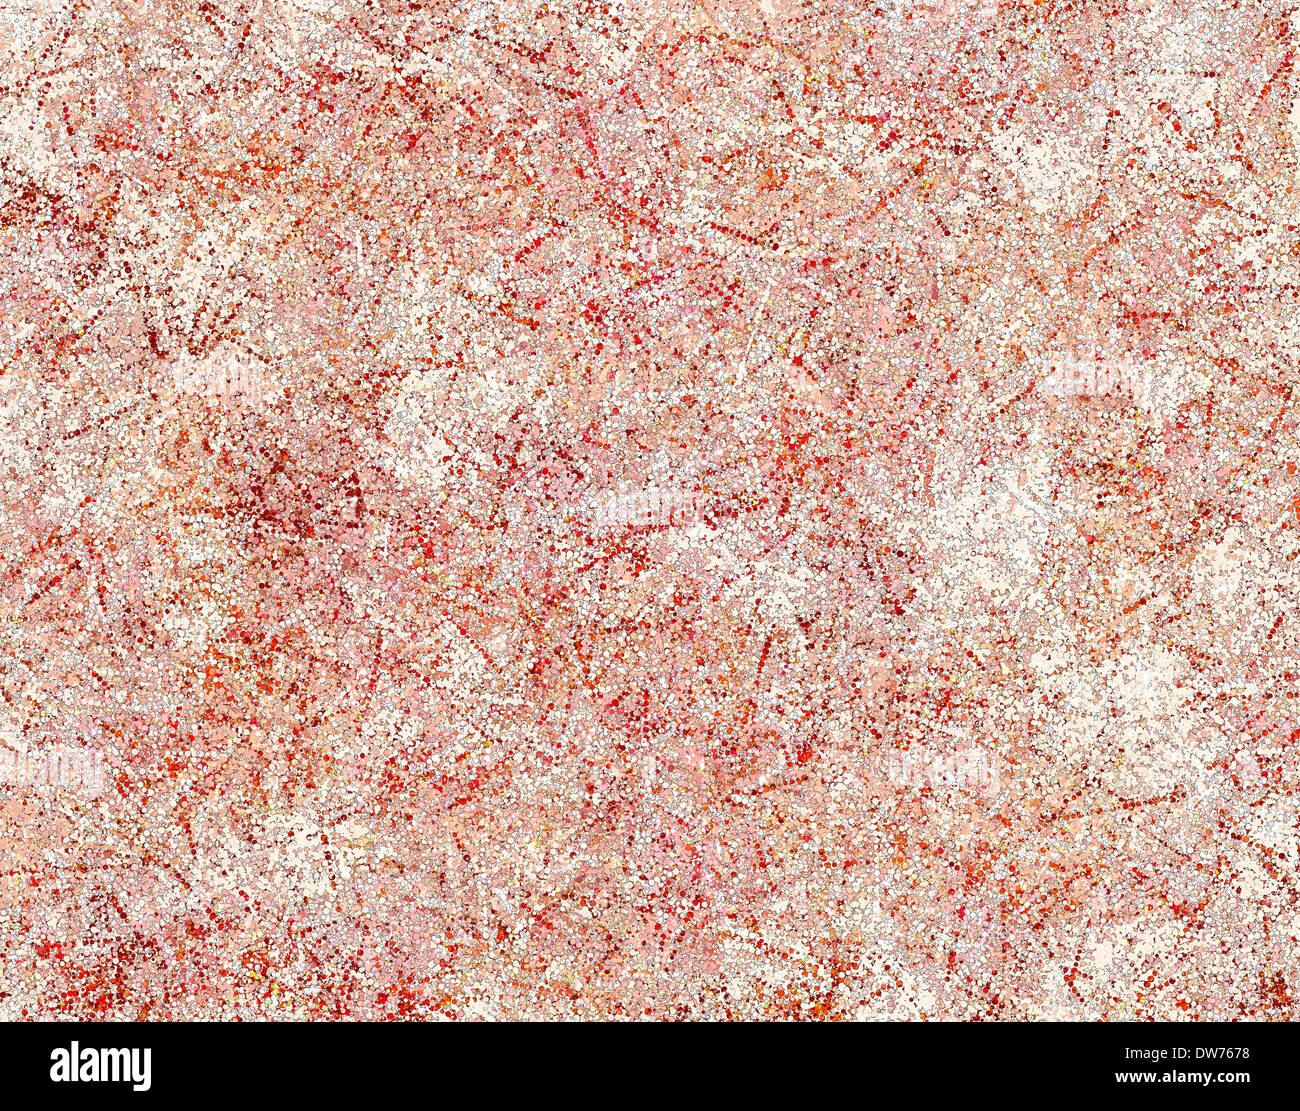 Abstract background texture of sprayed paint dots Stock Photo